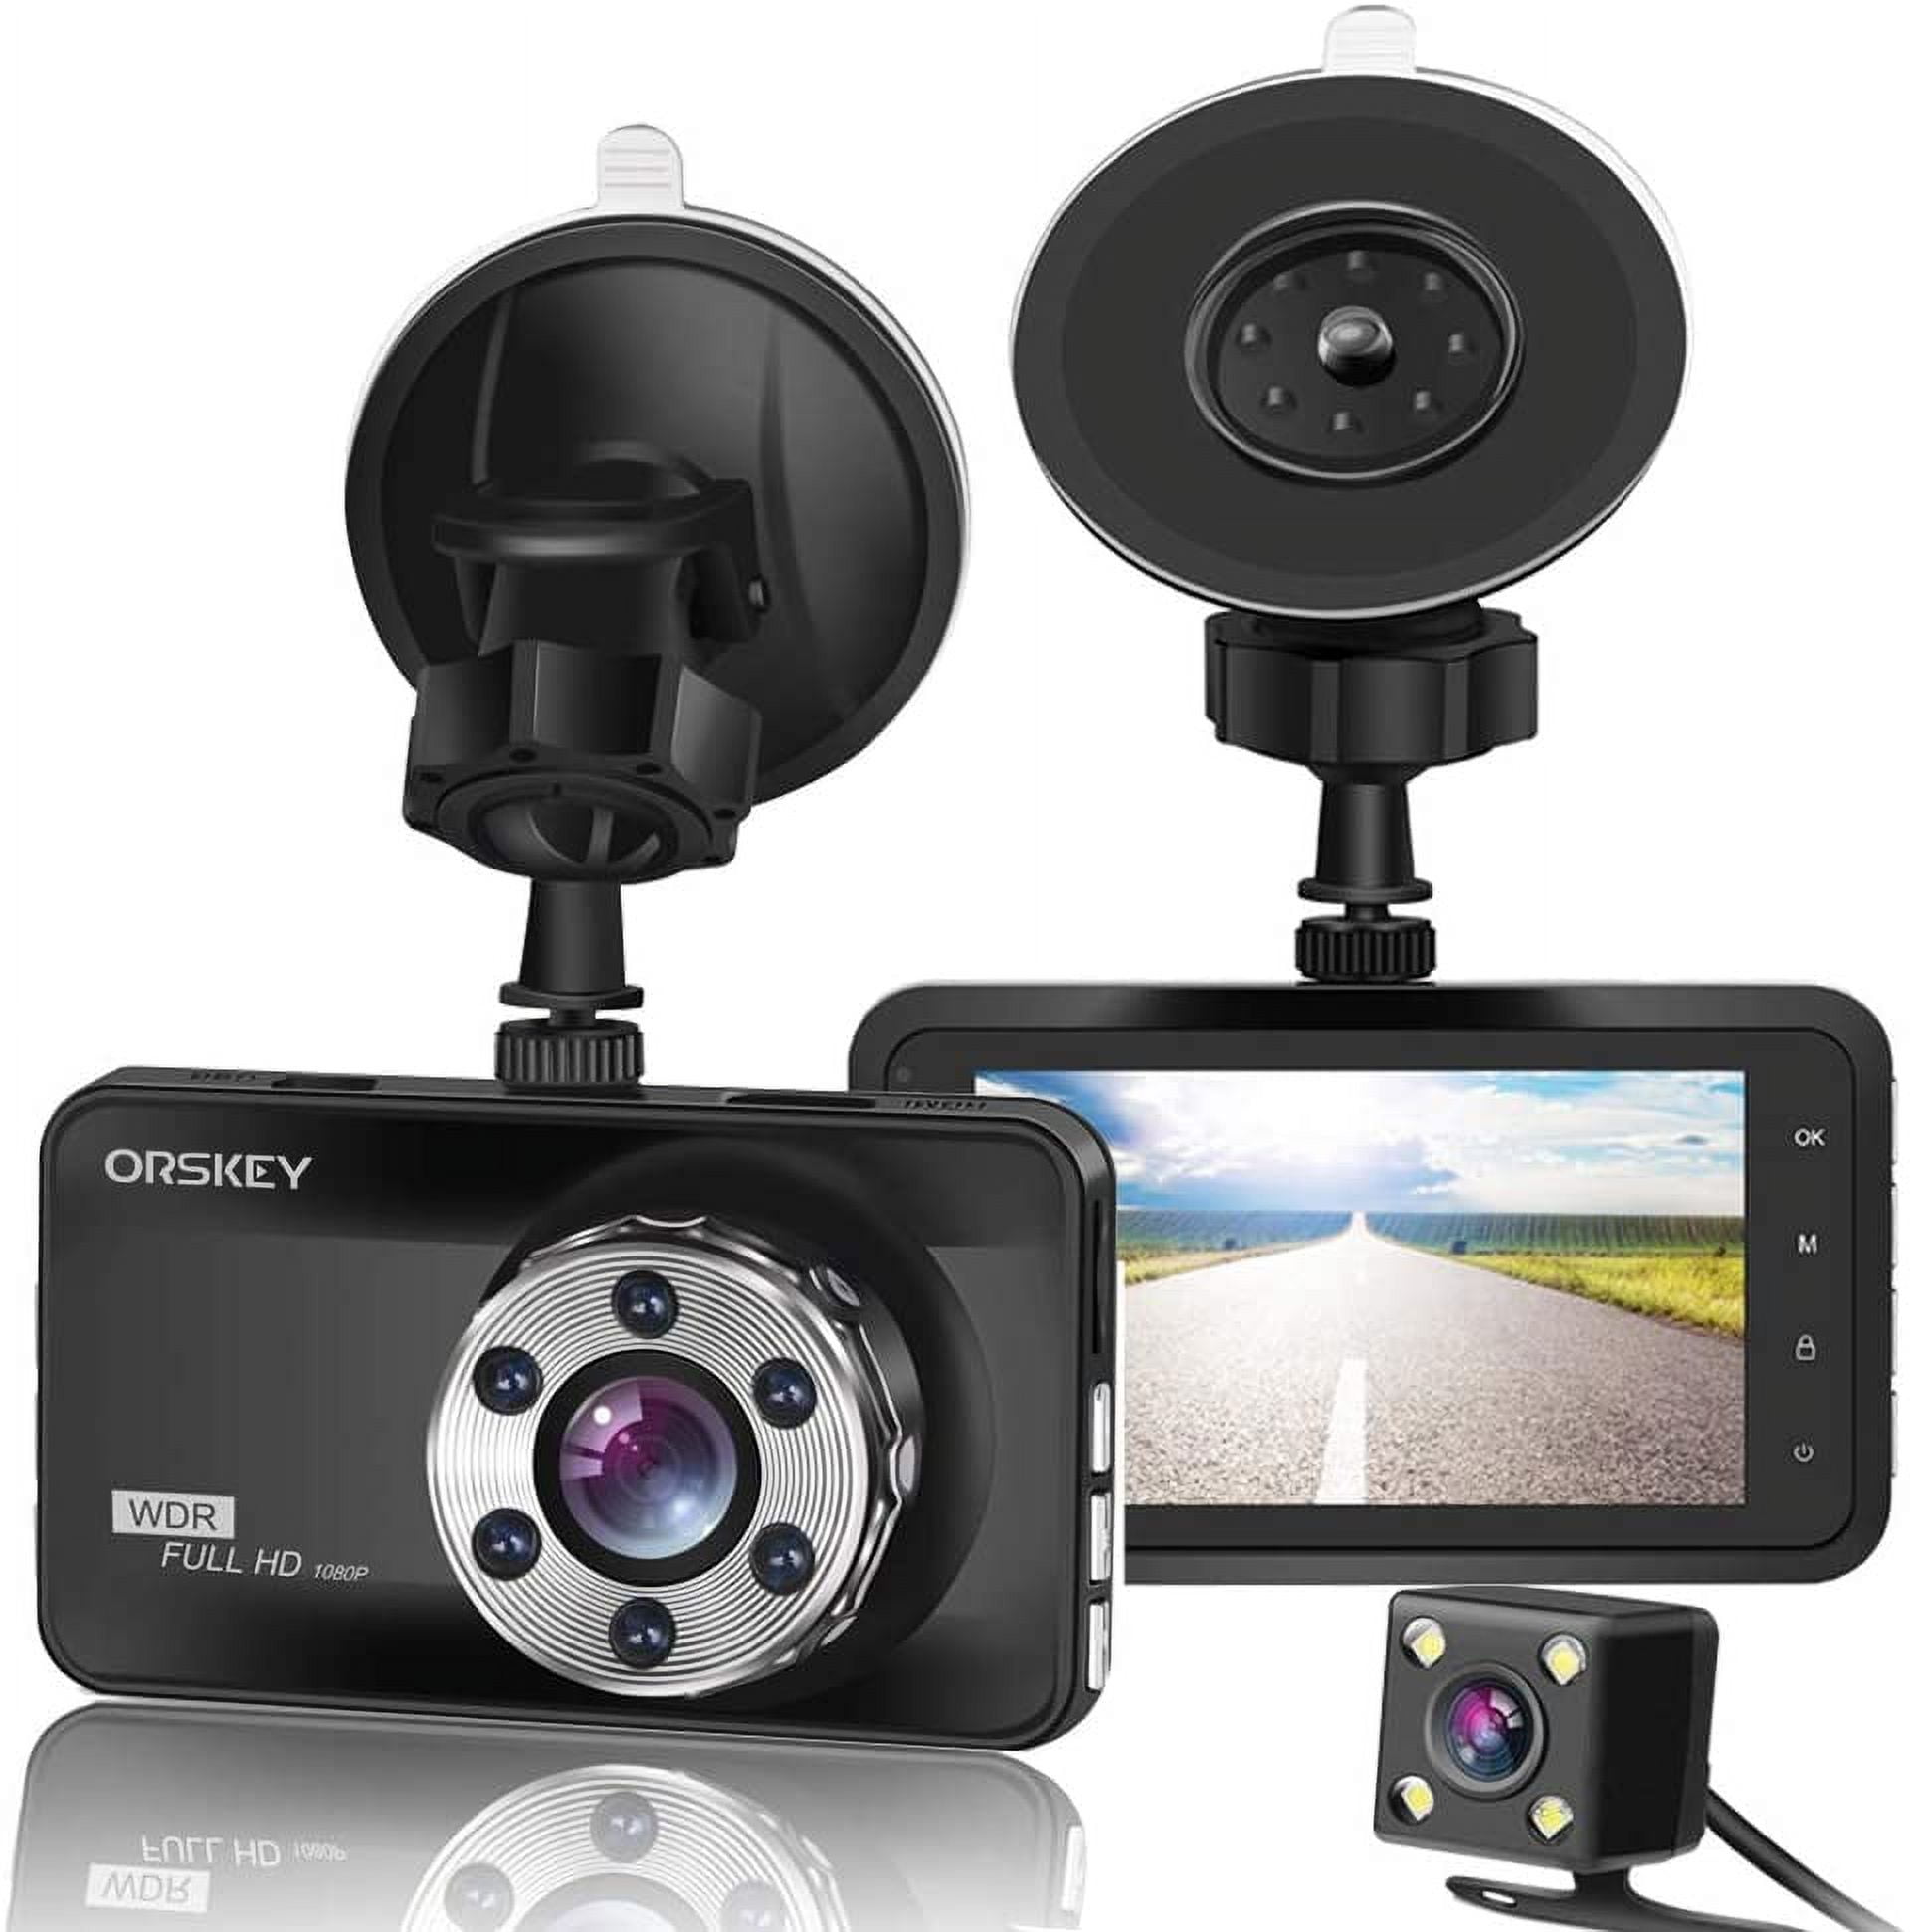 2019 Orskey Front and Rear Dash Cam Review vs. Yi Dash Camera 